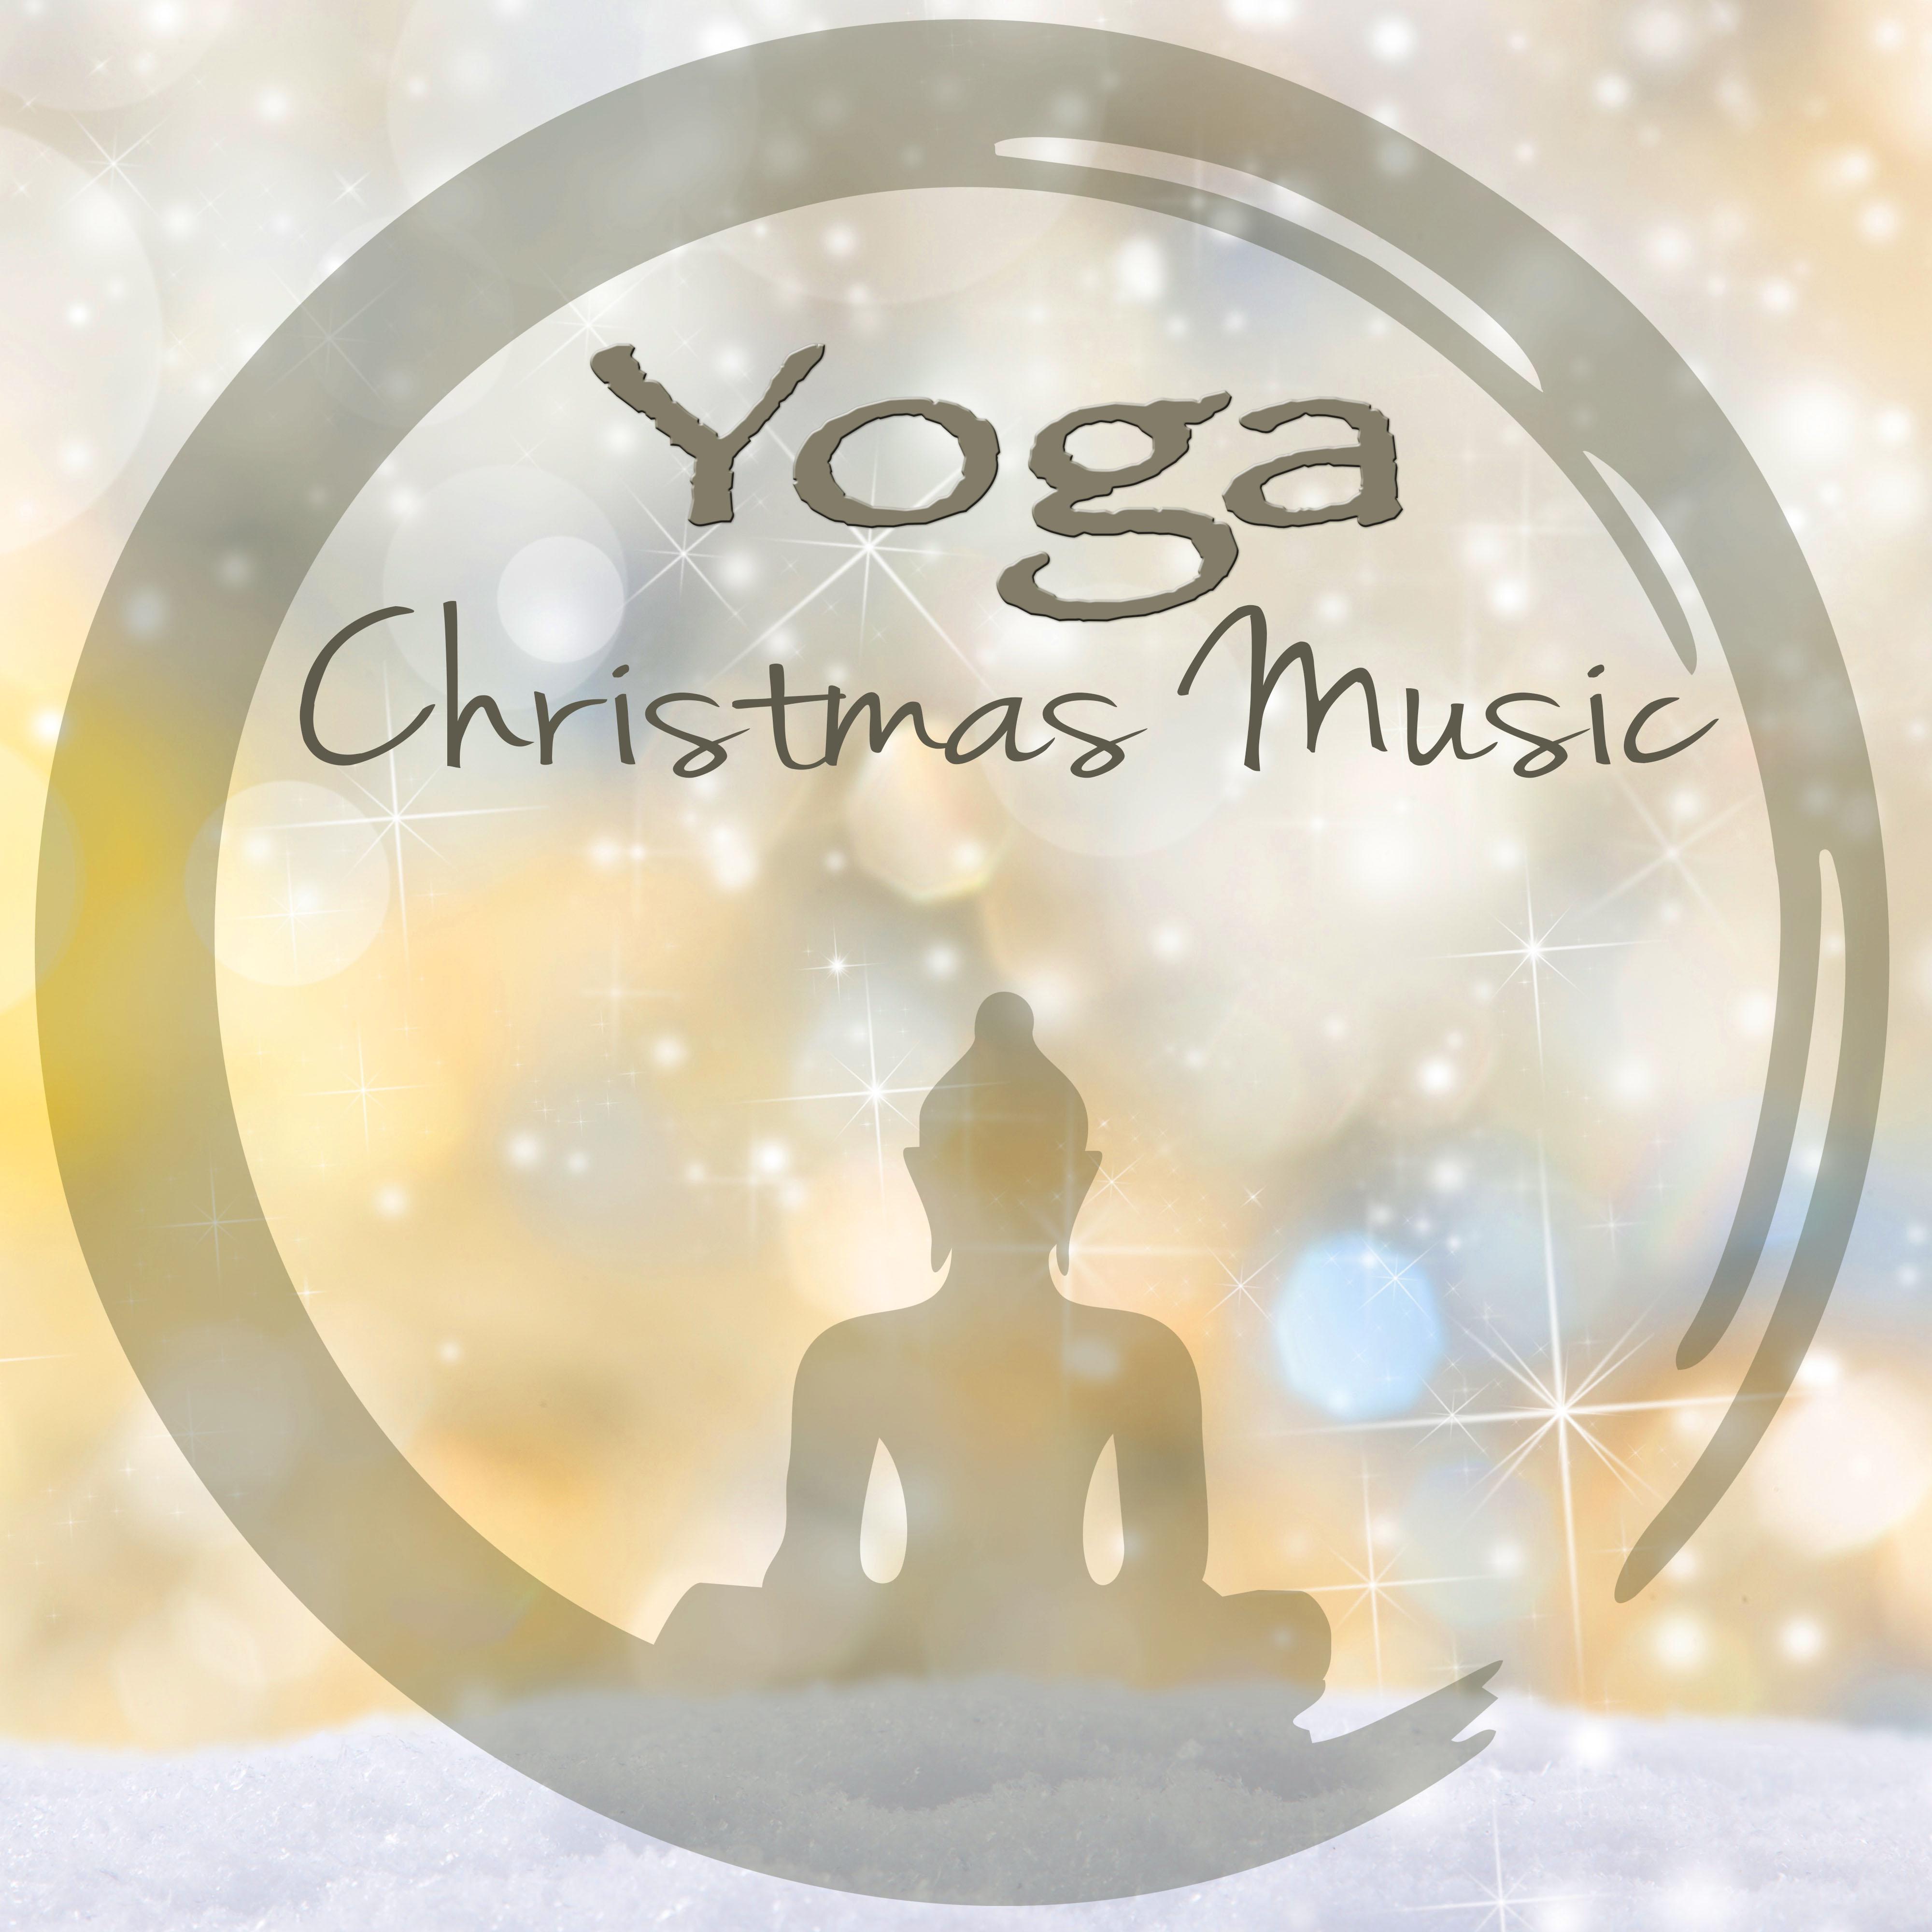 Yoga, Christmas Music – 50 Christmas Classics & Emotional Nature Sounds Relaxing Songs for Yoga Classes, Yoga Space Background Music